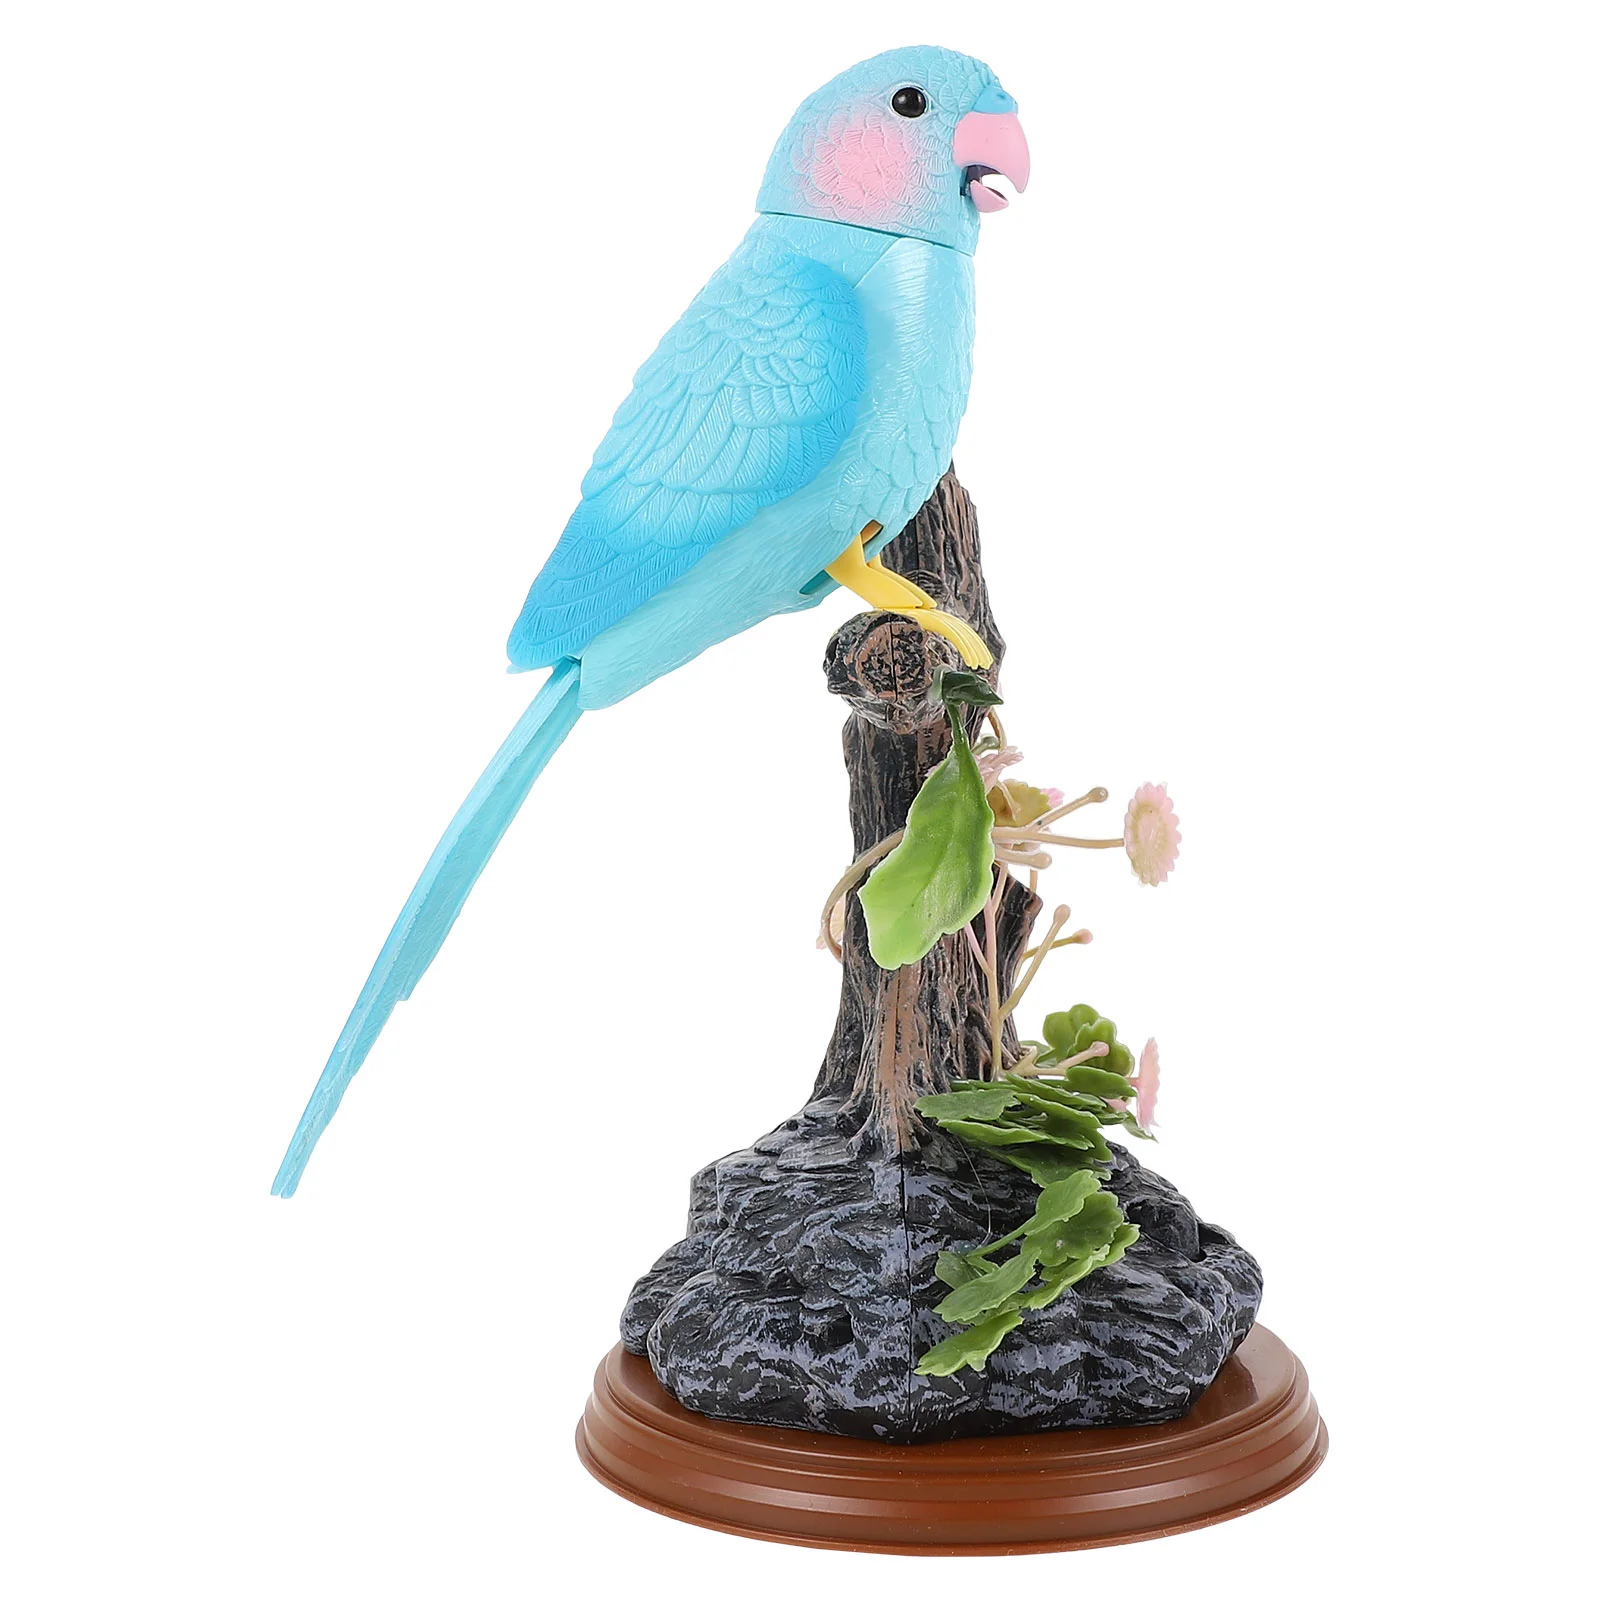 

Toy Parrot Talking Bird Electronic Voice Kids Animal Birds Singing What You Say Pet Cage Speakingactivated Electric Toys Repeat